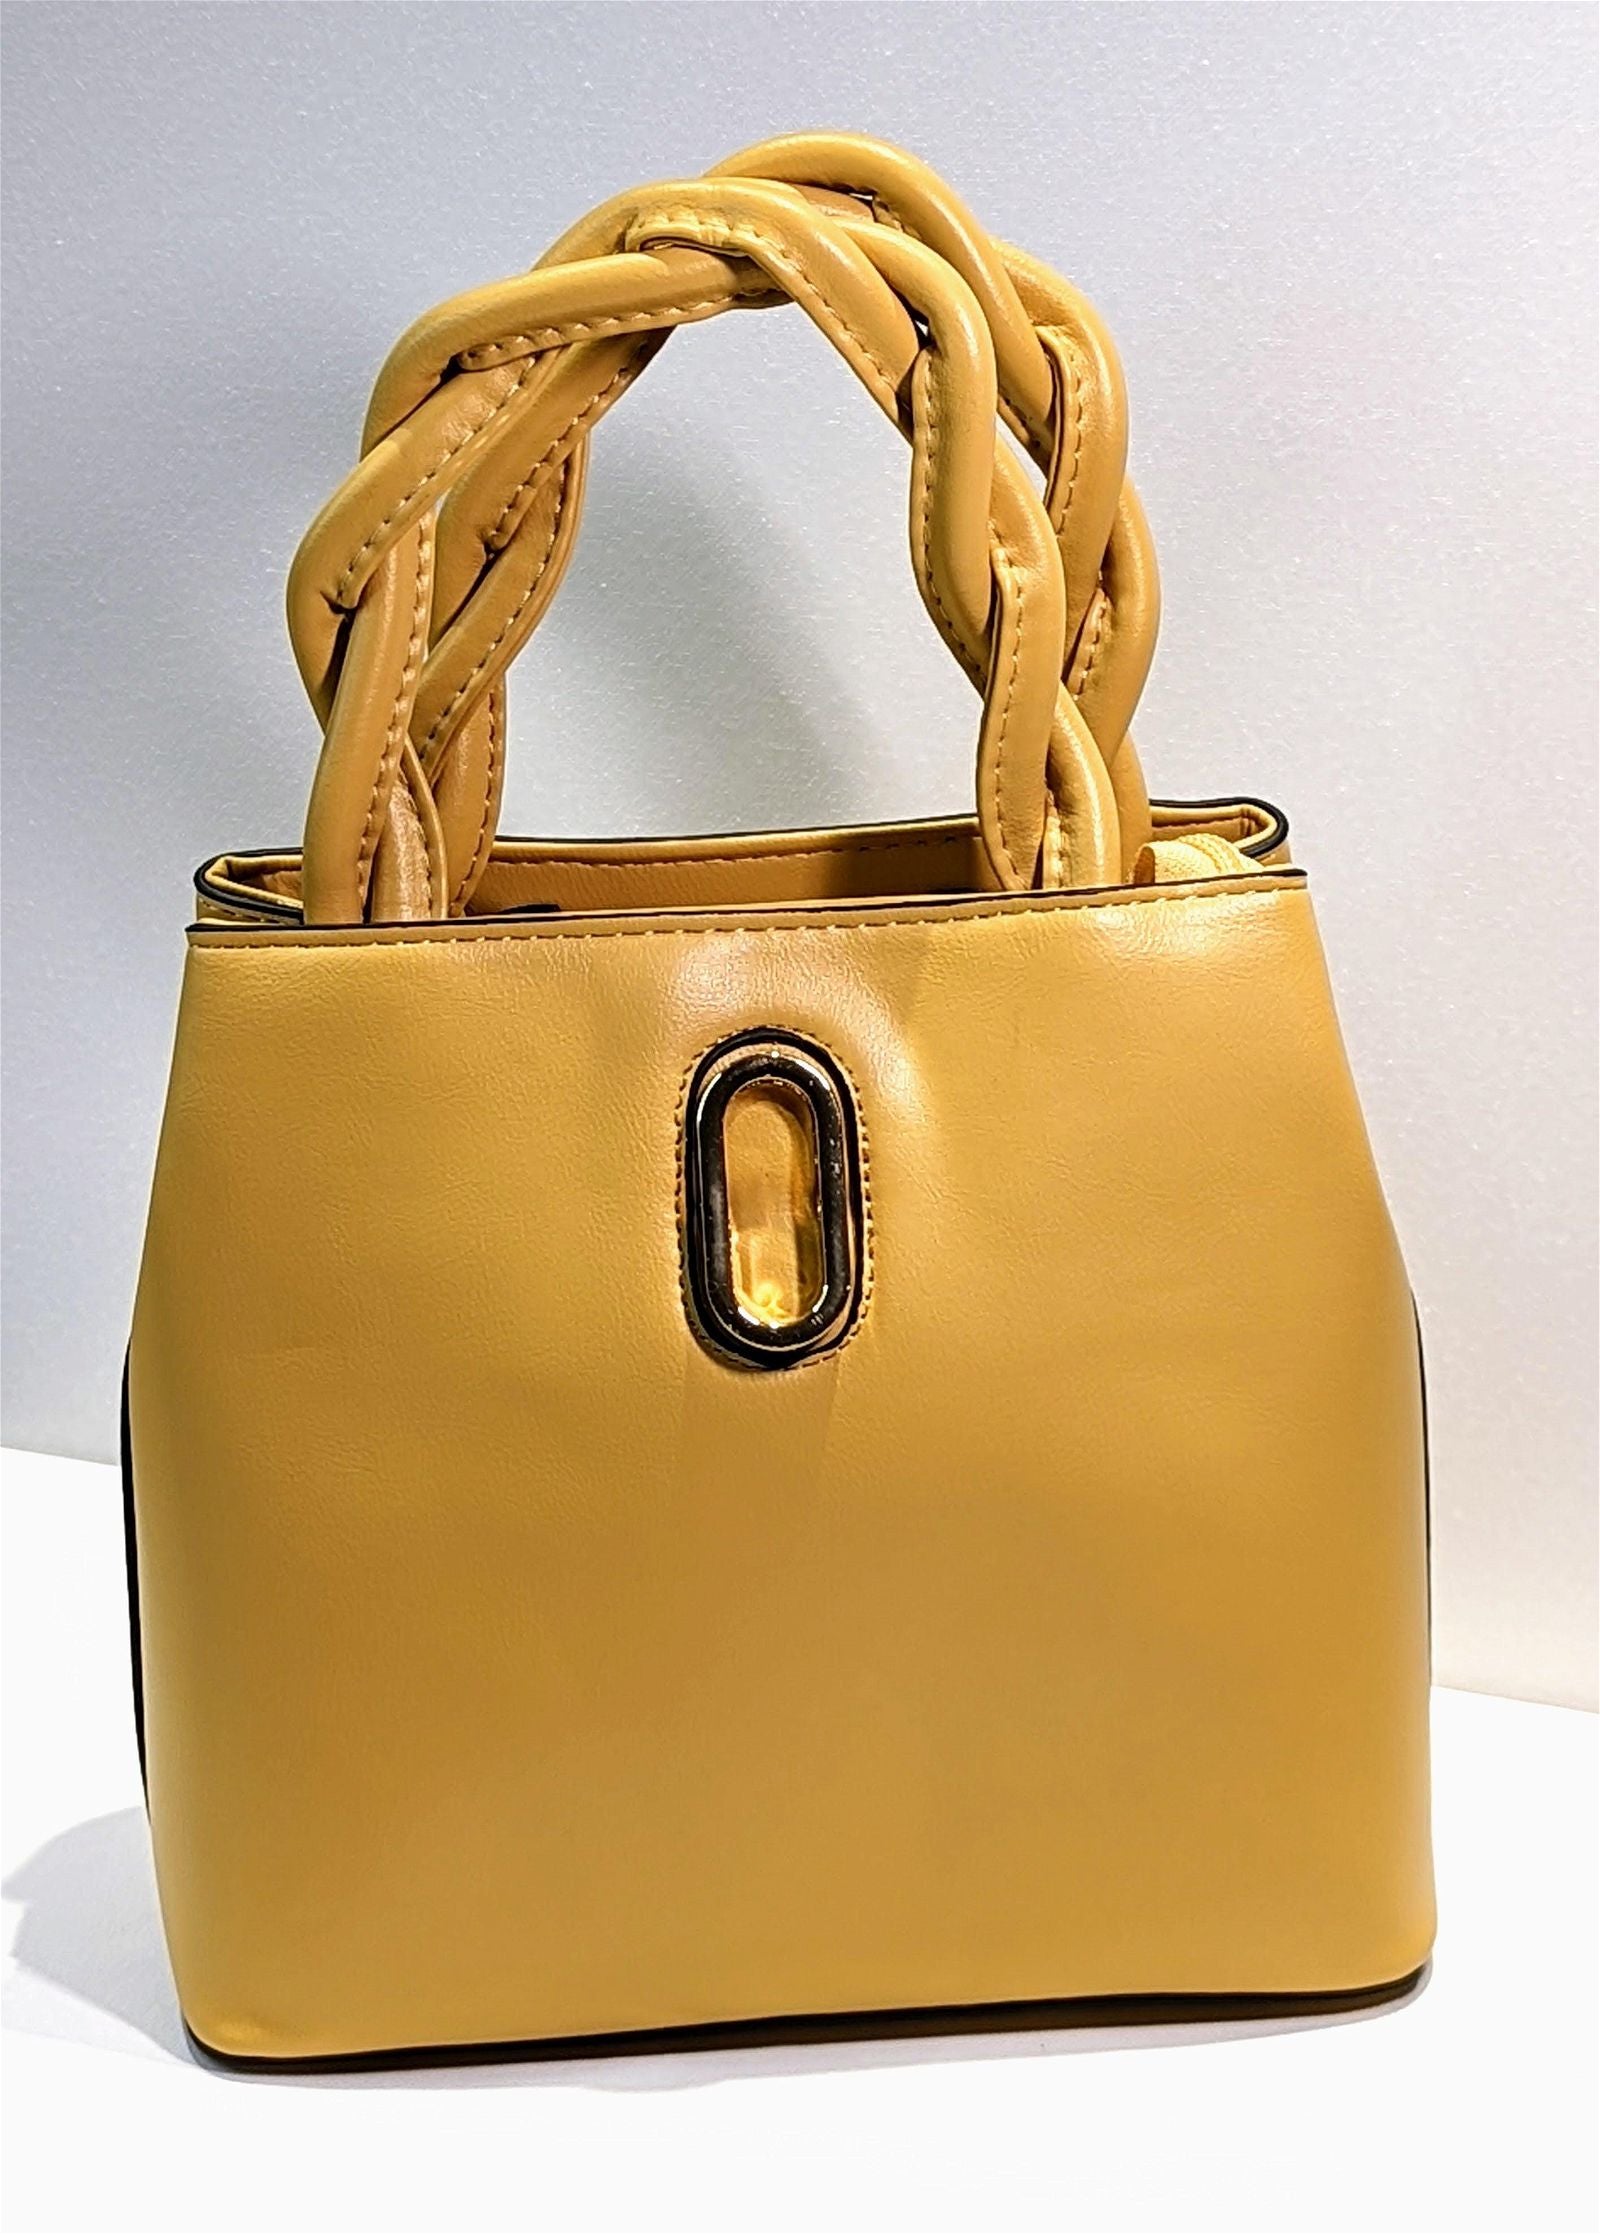 The Twisted Handler Bag - Maily's Classic Accessories